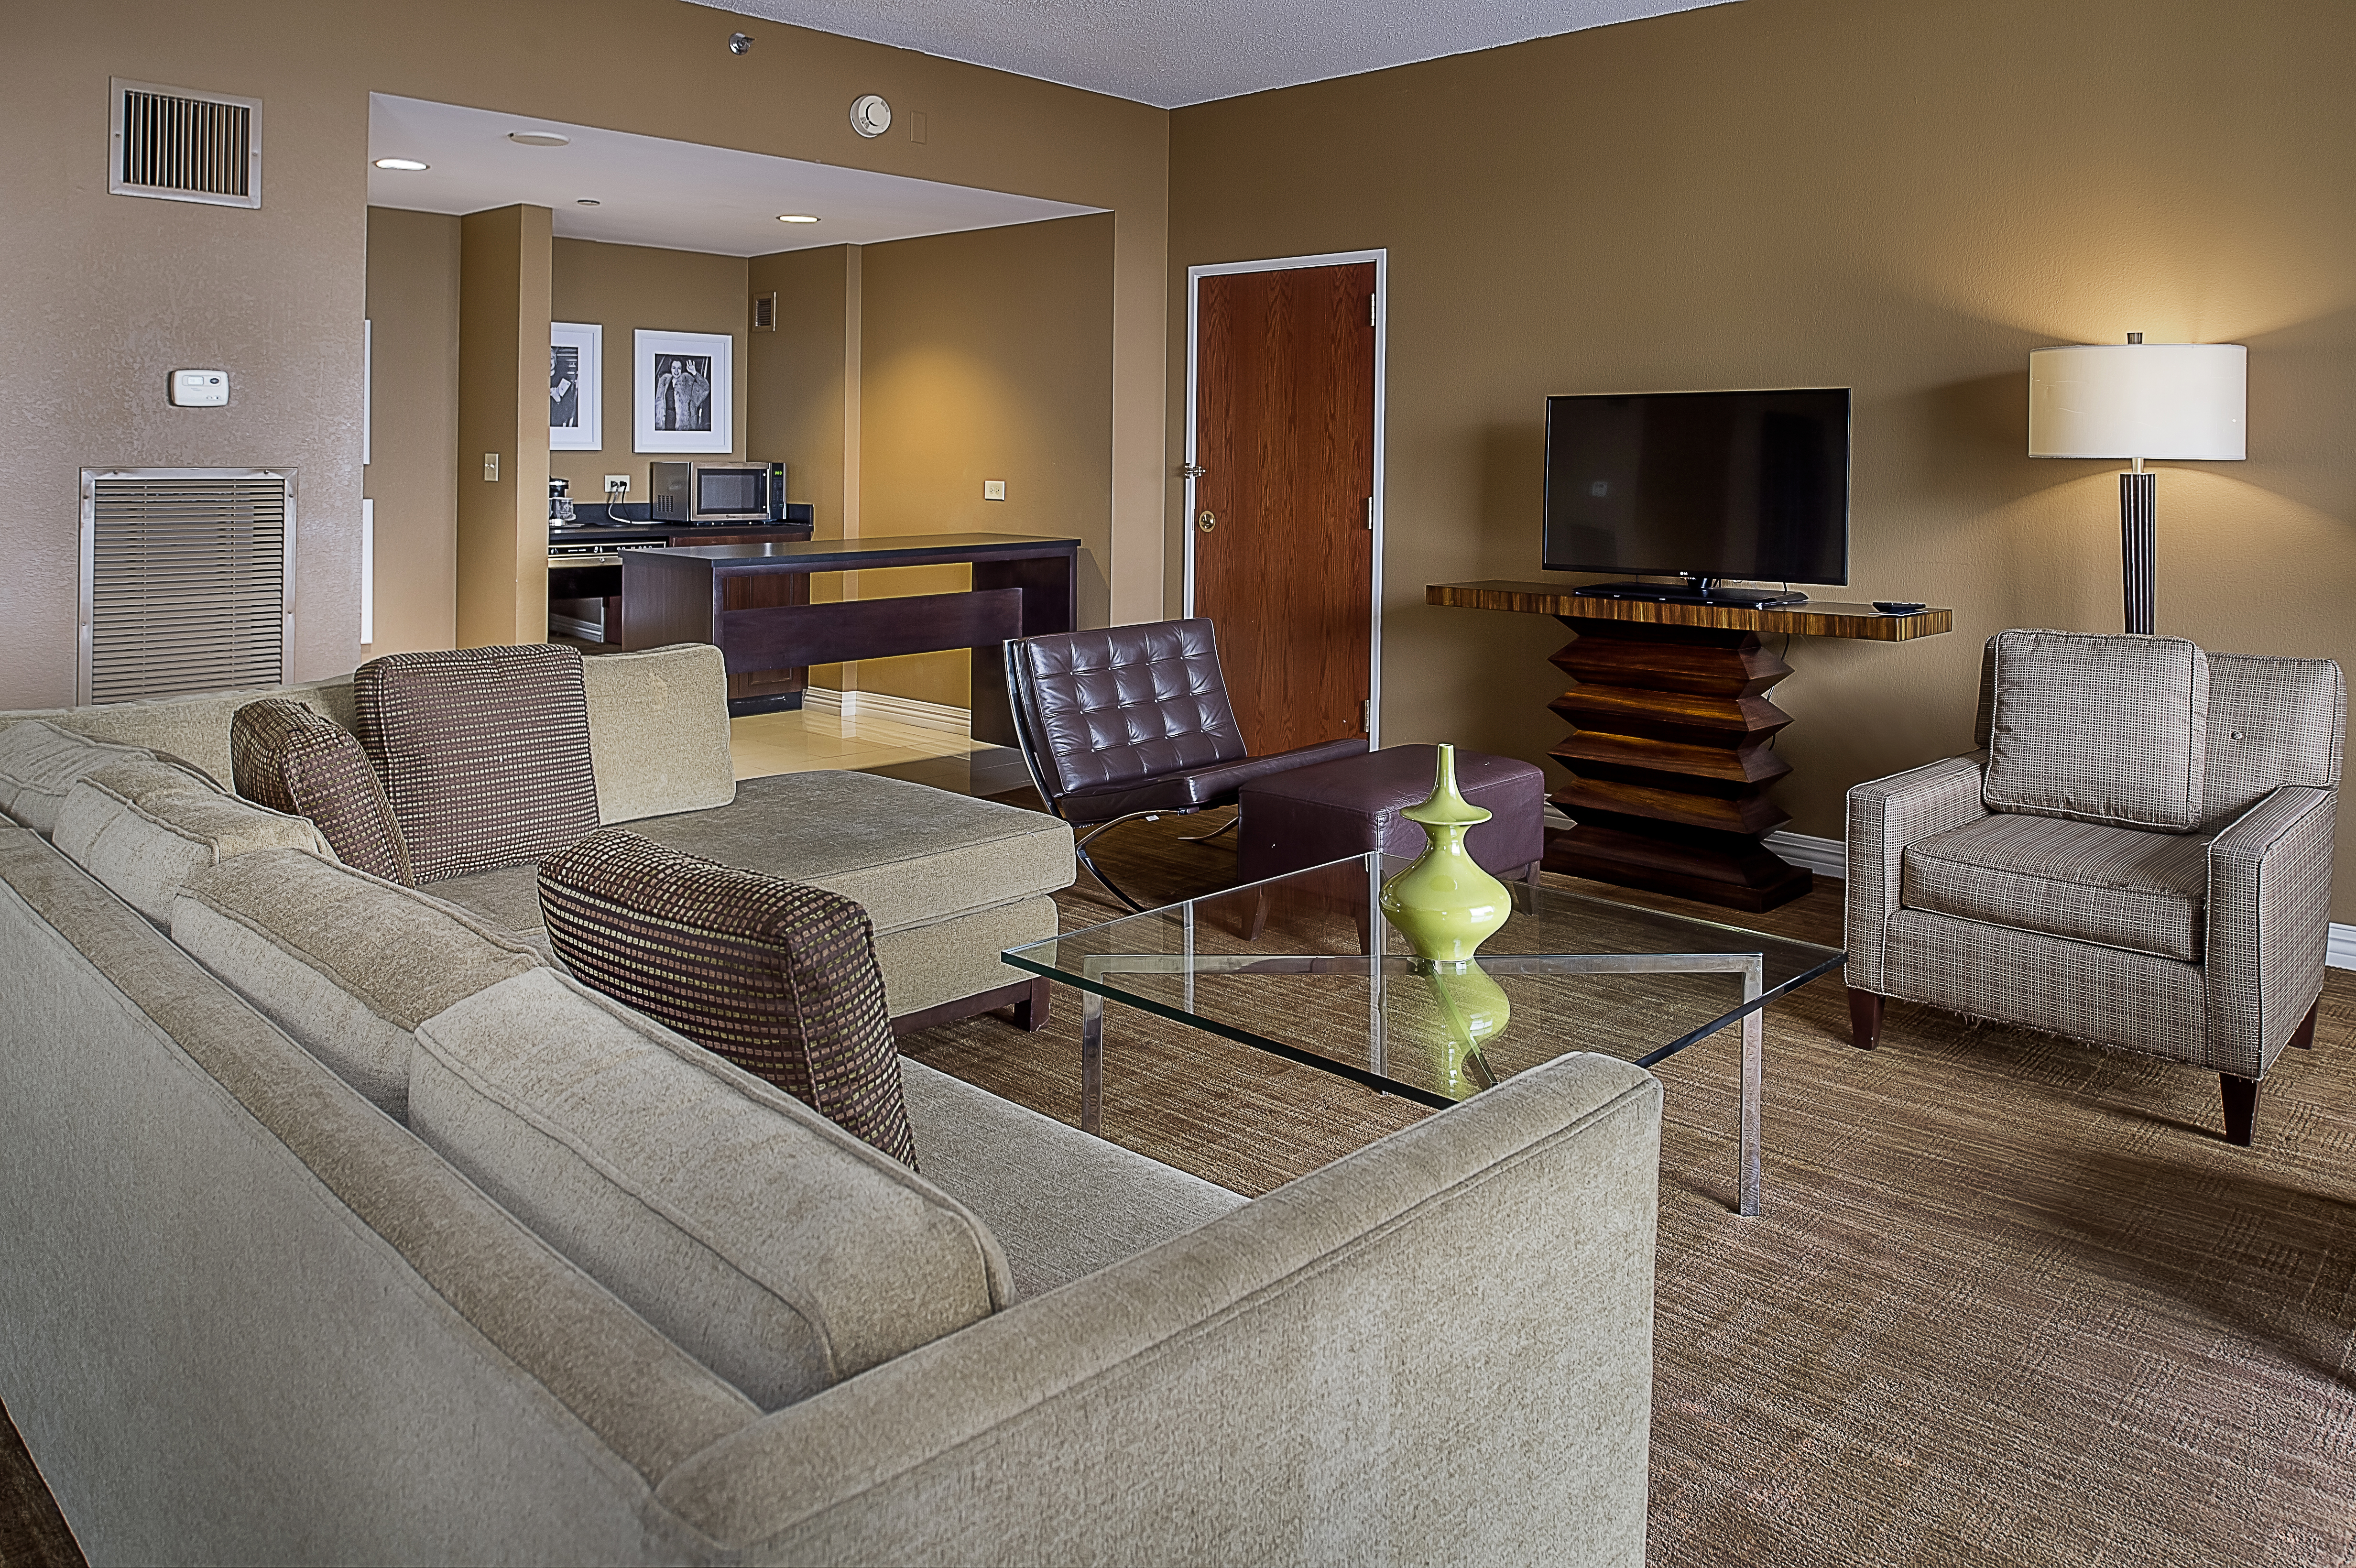 Presidential Suite Living Room with Couch, Chairs, Television and Kitchen Area